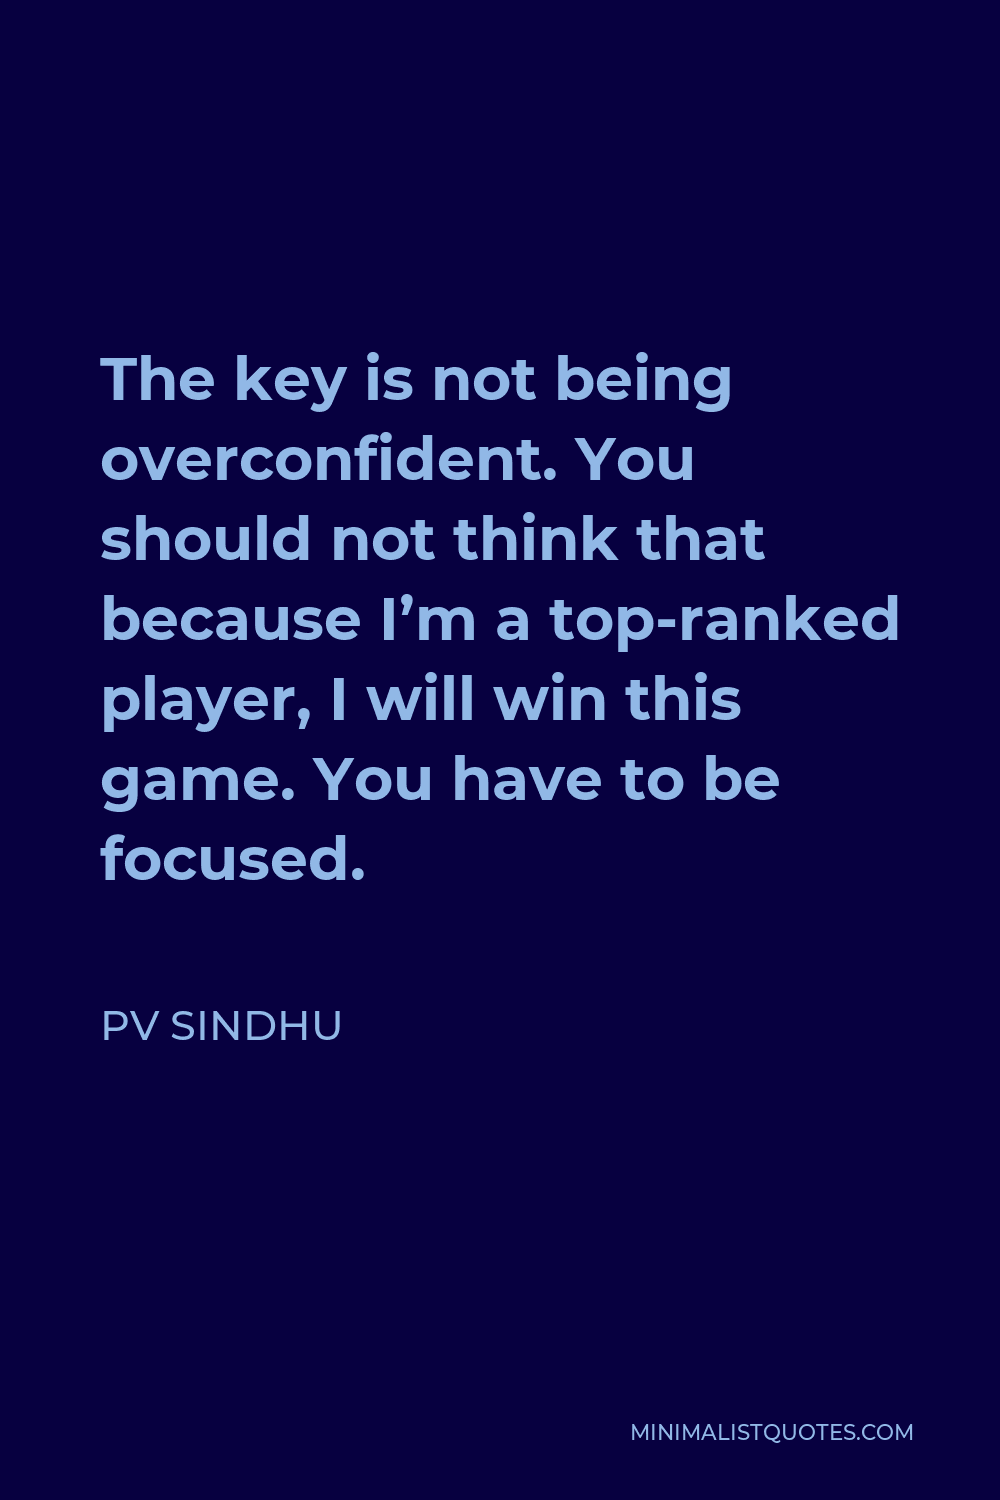 PV Sindhu Quote: The key is not being overconfident. You should not think  that because I'm a top-ranked player, I will win this game. You have to be  focused.